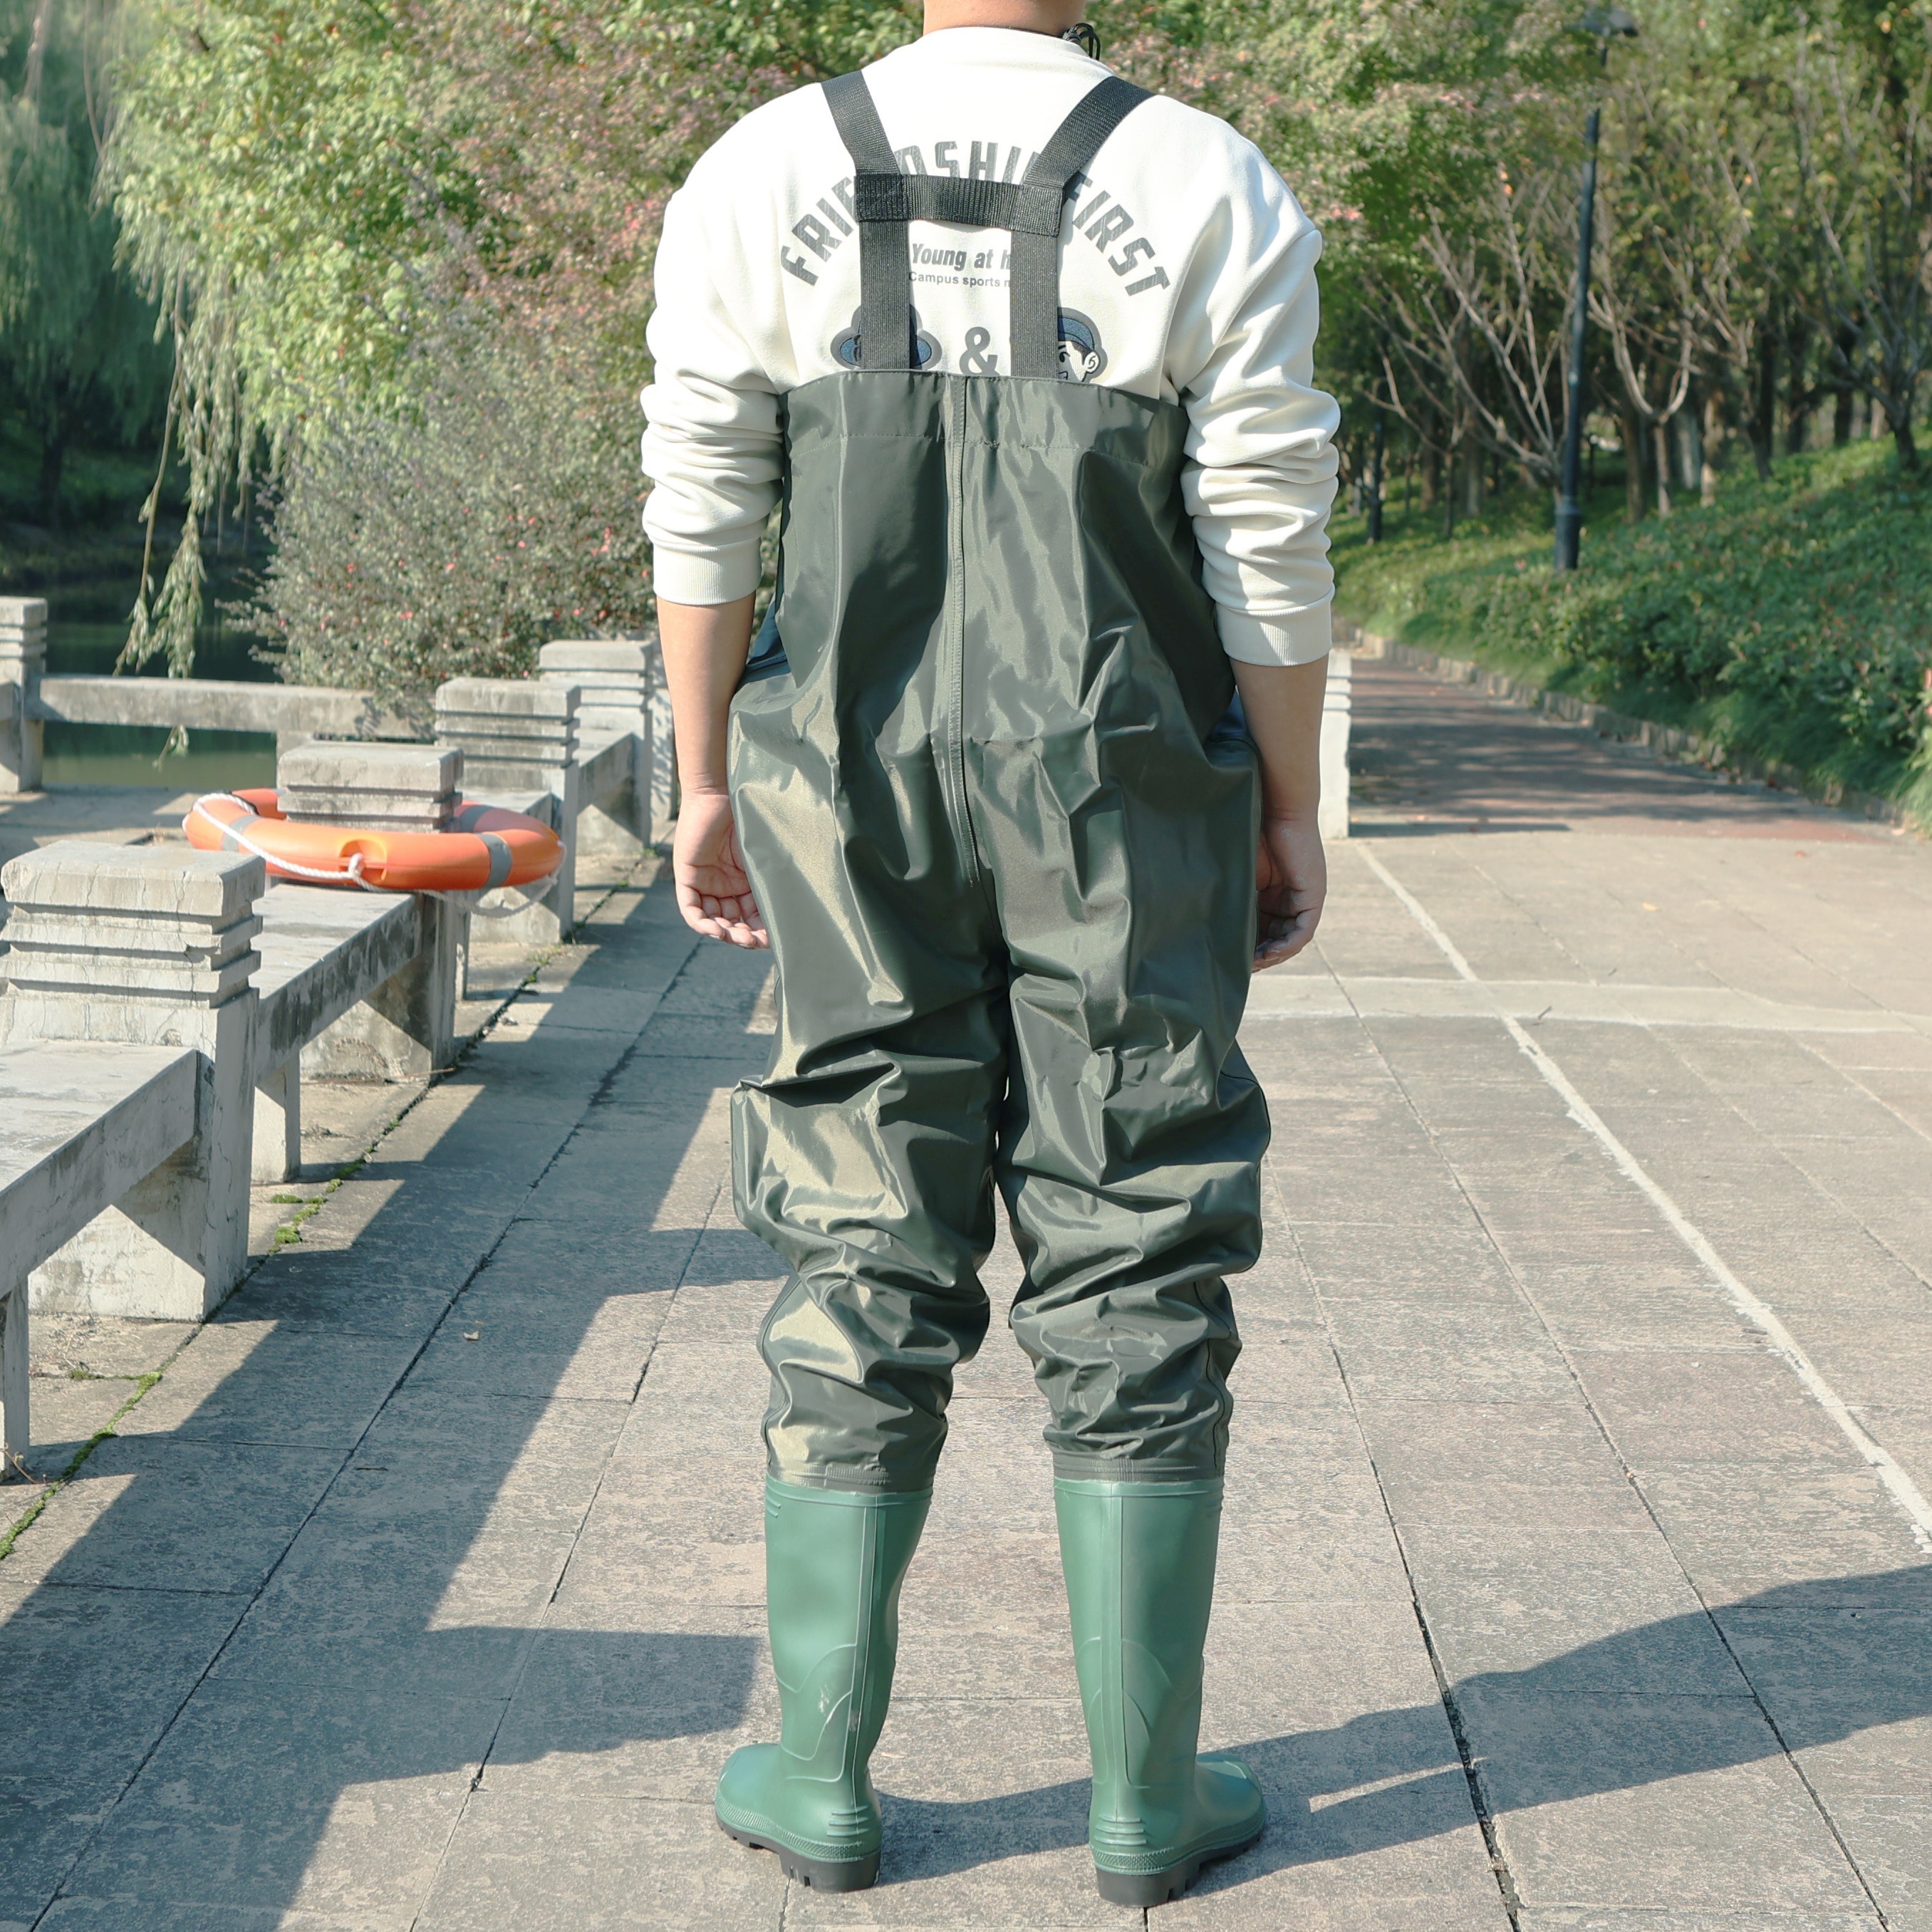 Chest Clothes Waders Shoes, Waders Fishing Waterproof